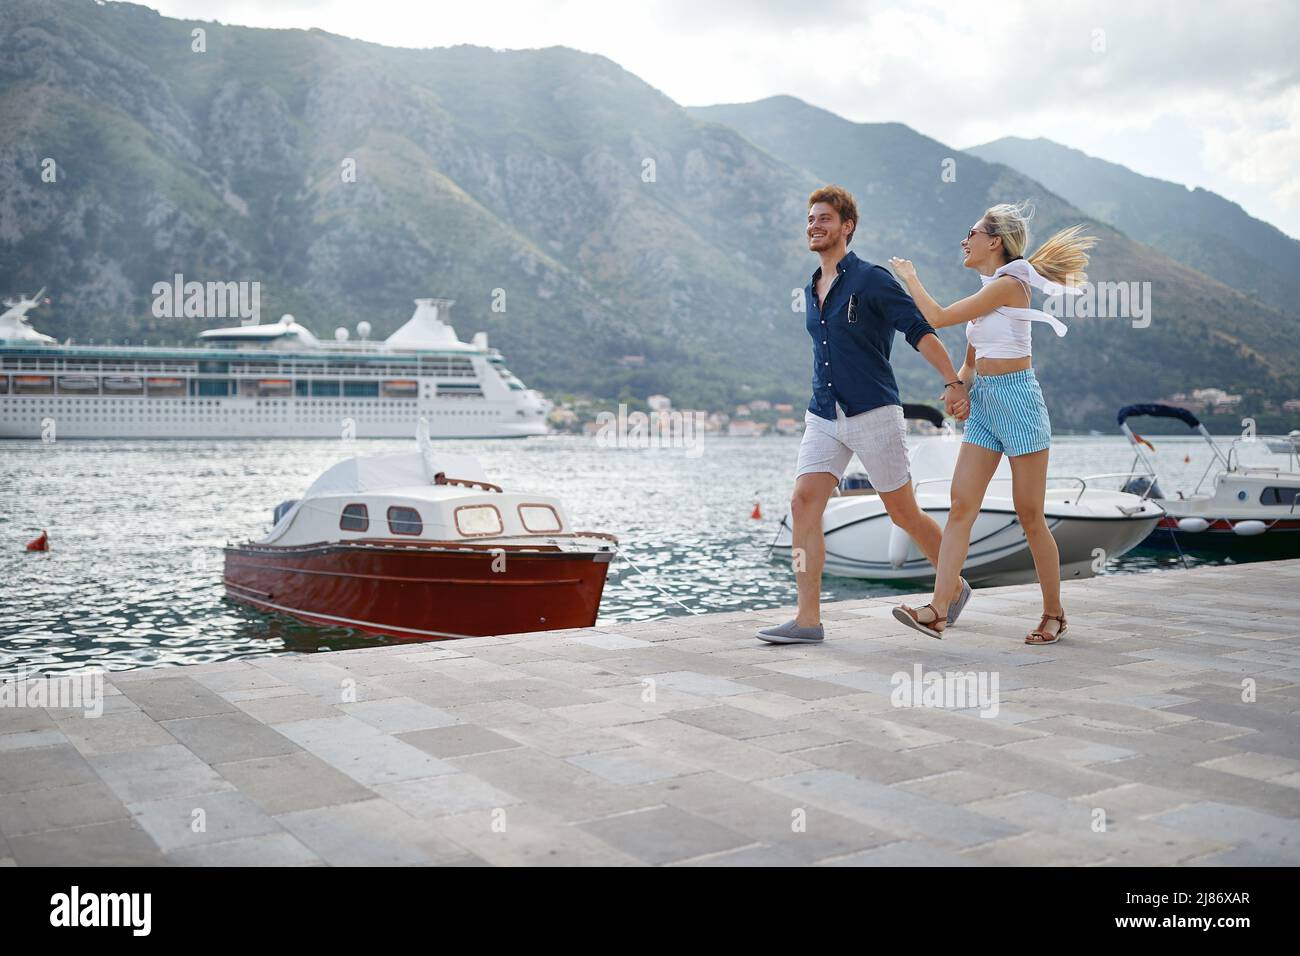 Summer love. Happy couple on dock holding hands and jumping. Travel, love, fun, togetherness, lifestyle concept. Stock Photo